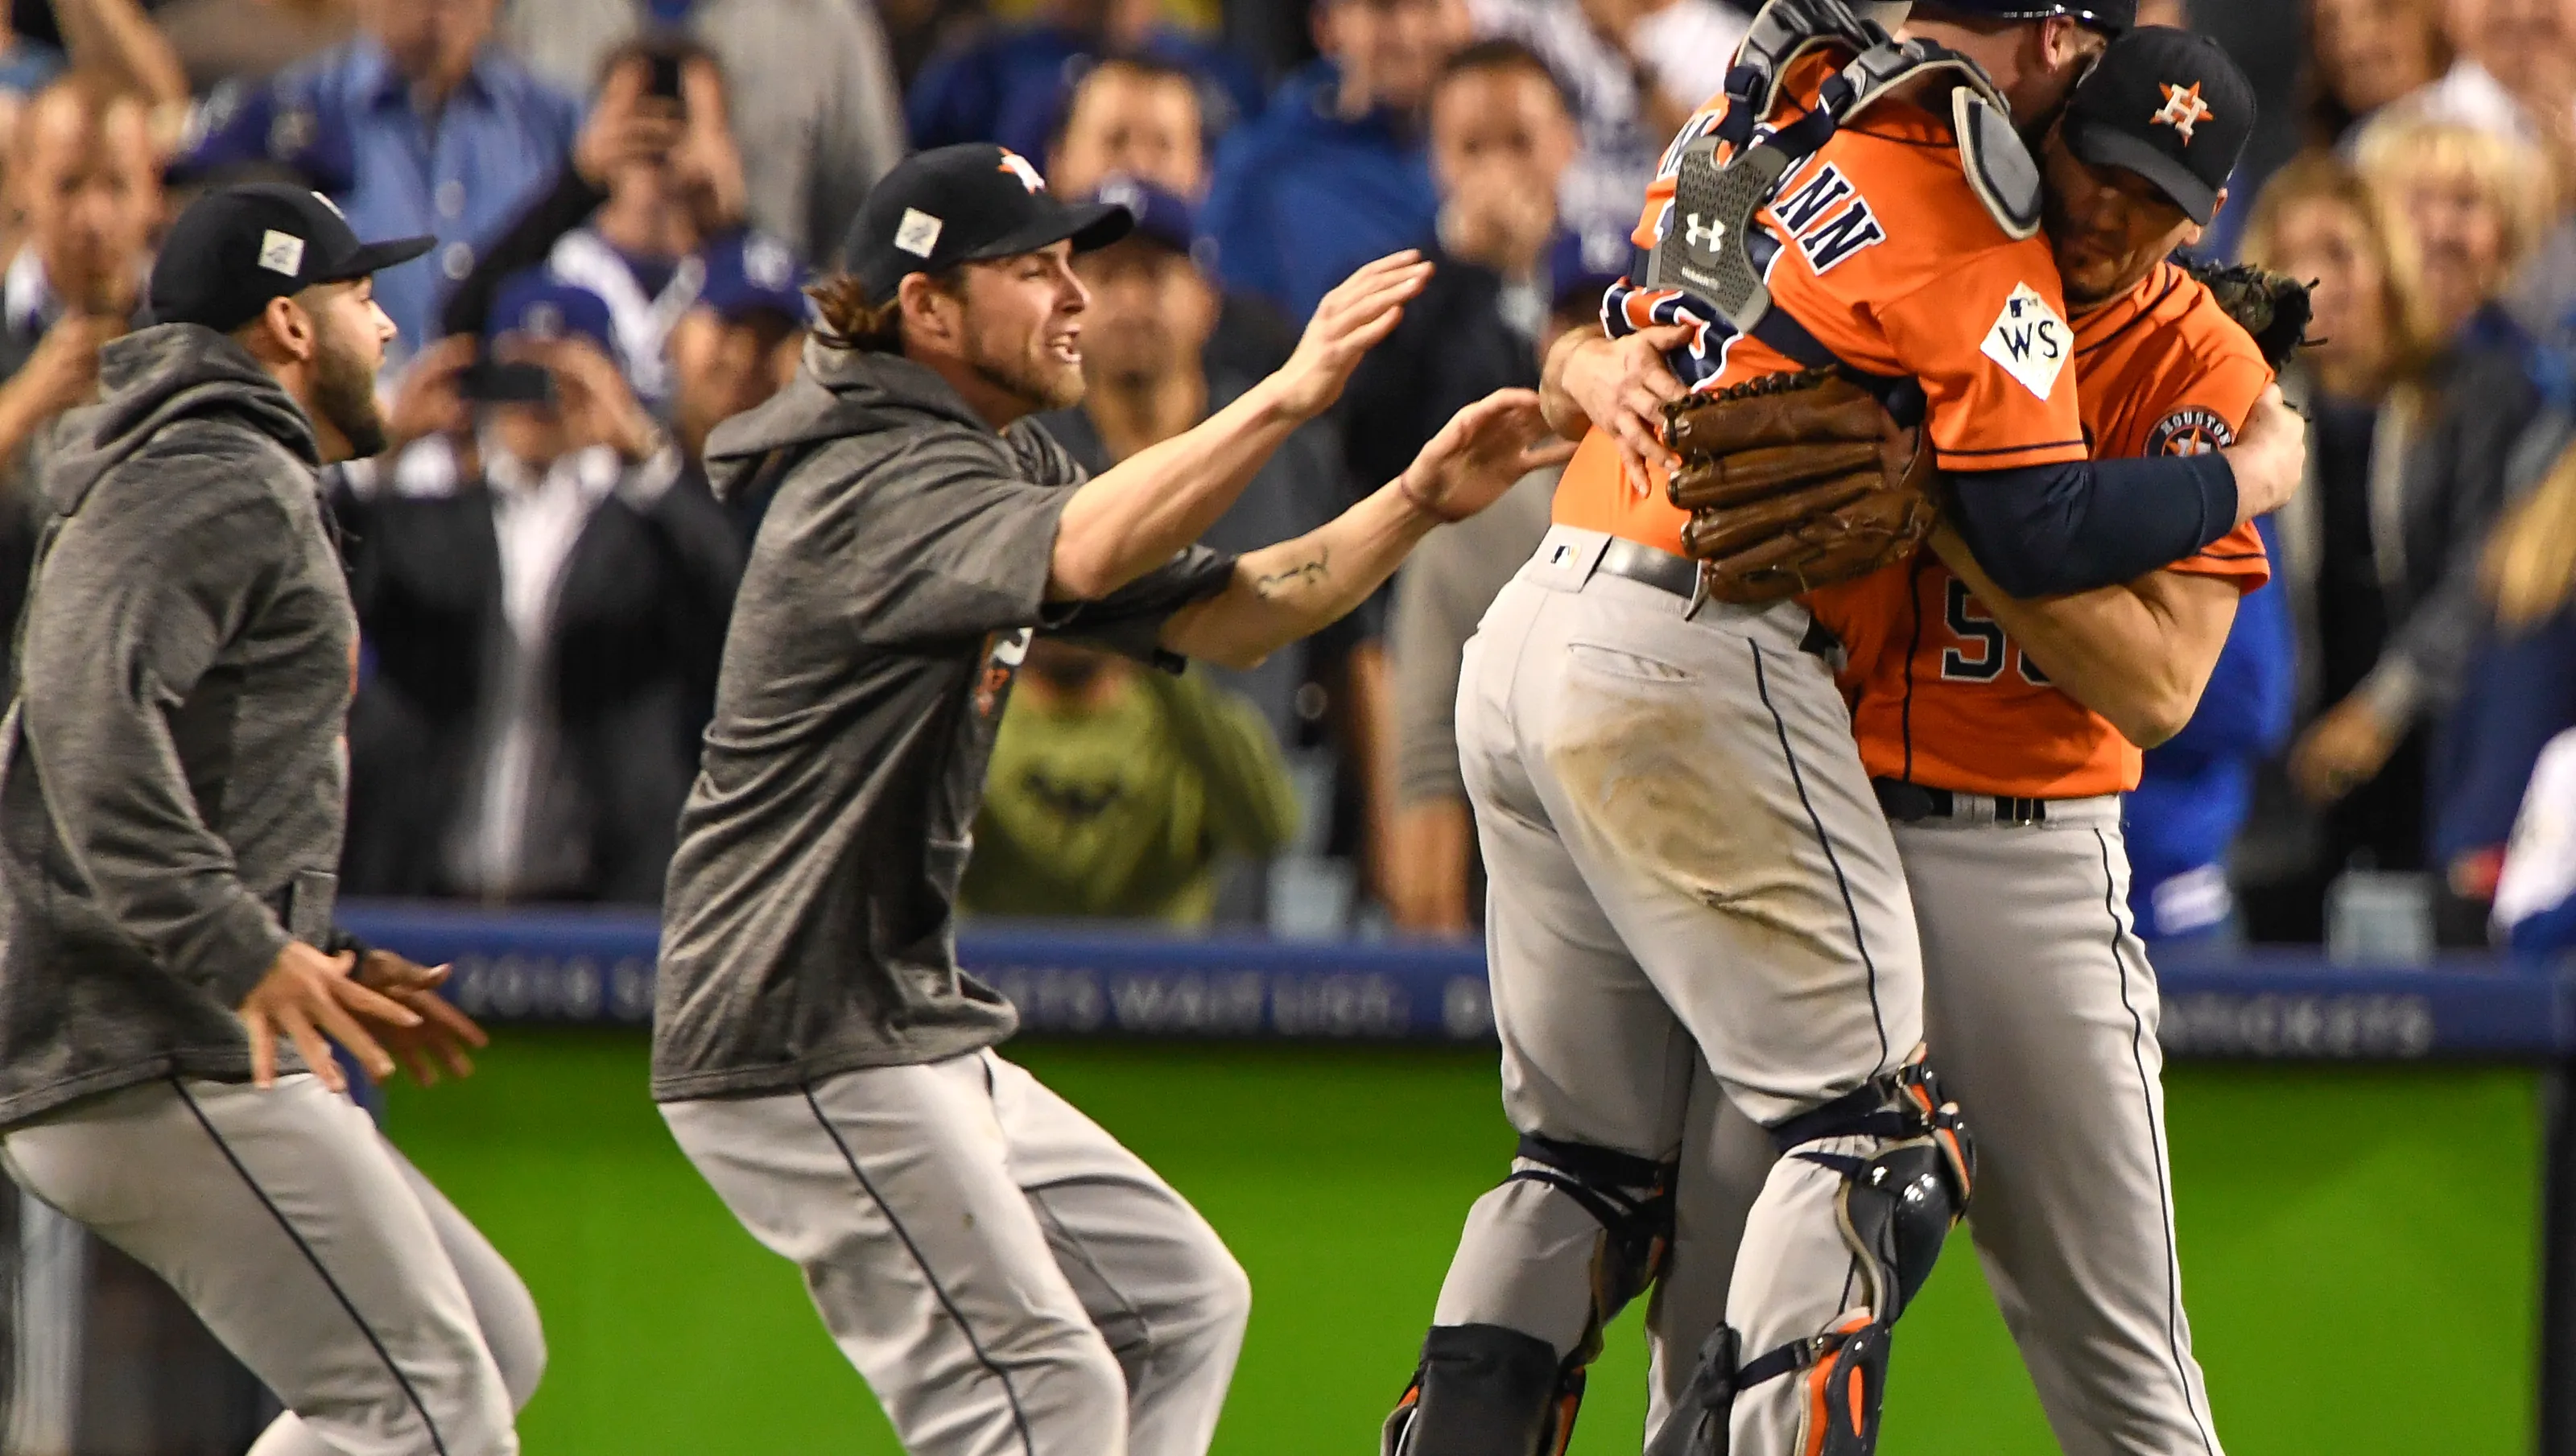 Houston Astros: A Journey Through Thrilling Games and Memorable Moments